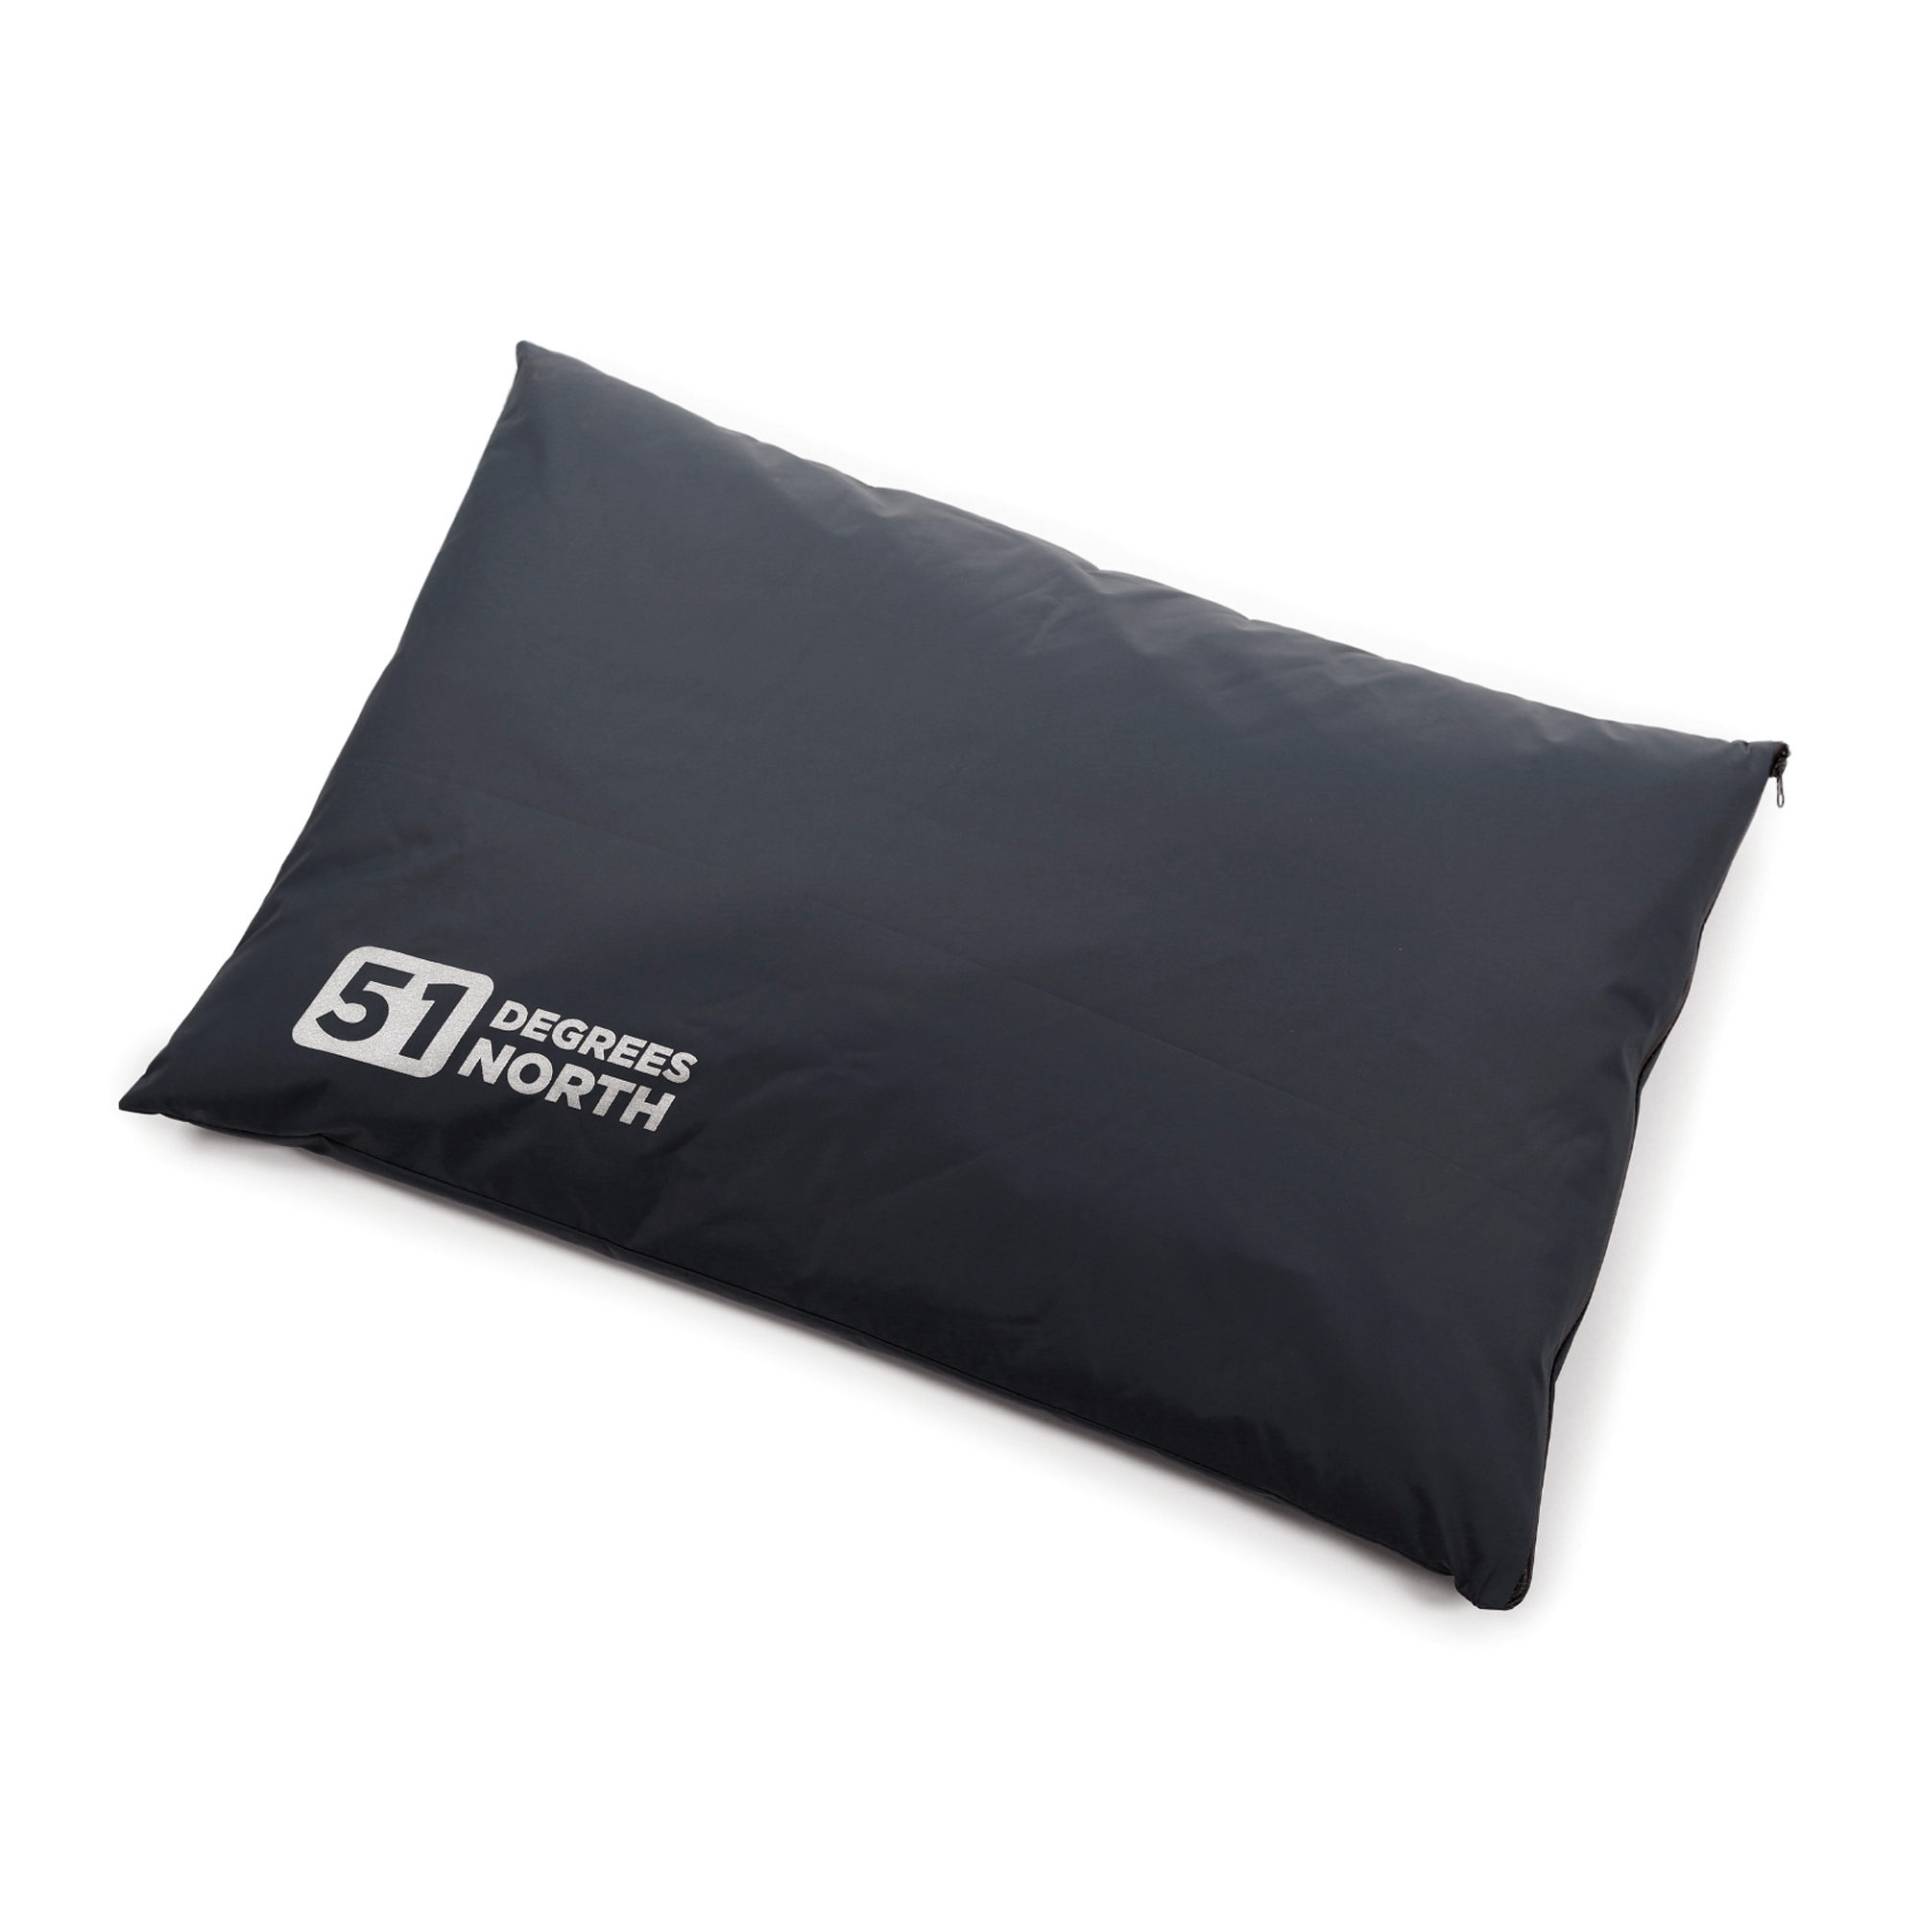 51 Degrees North Storm Bench Cushion - Fire Red - XL von 51 Degrees North